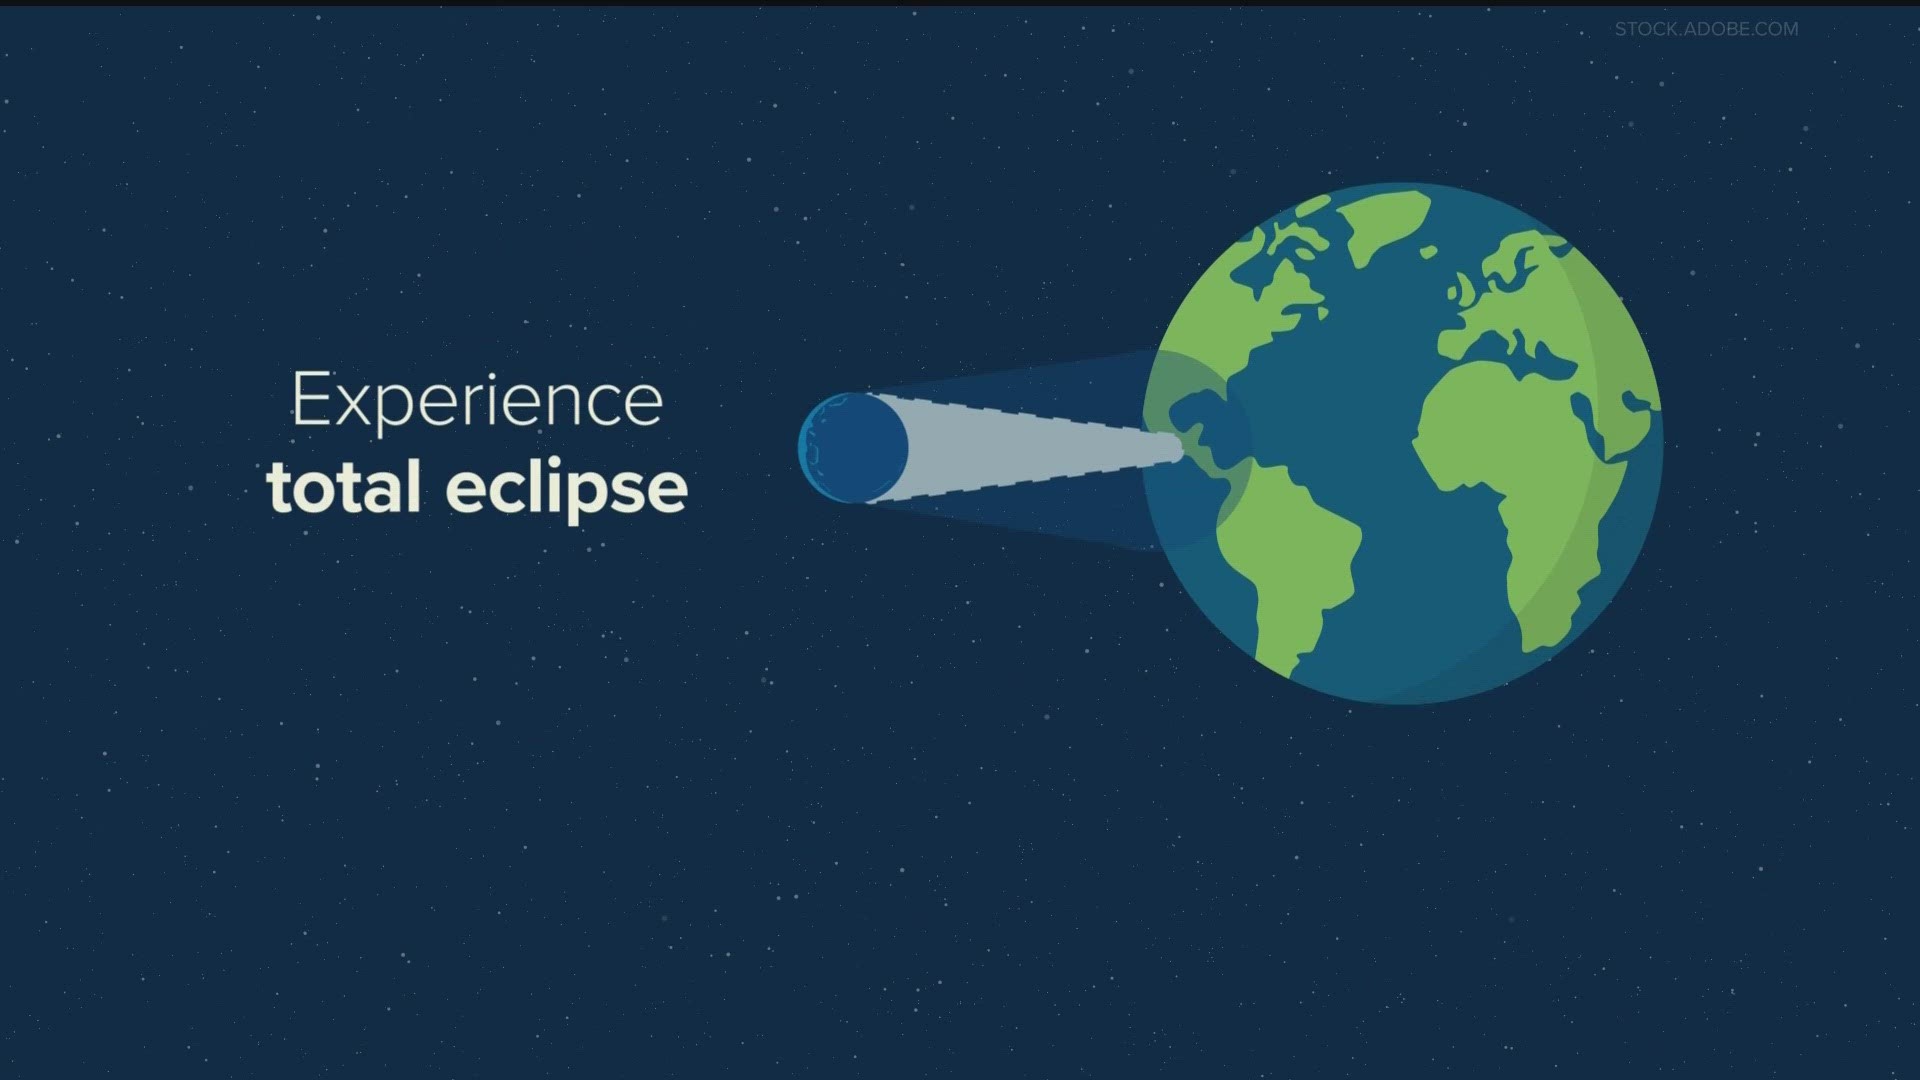 On April 8, we'll have a partial eclipse visible from the Peach State.